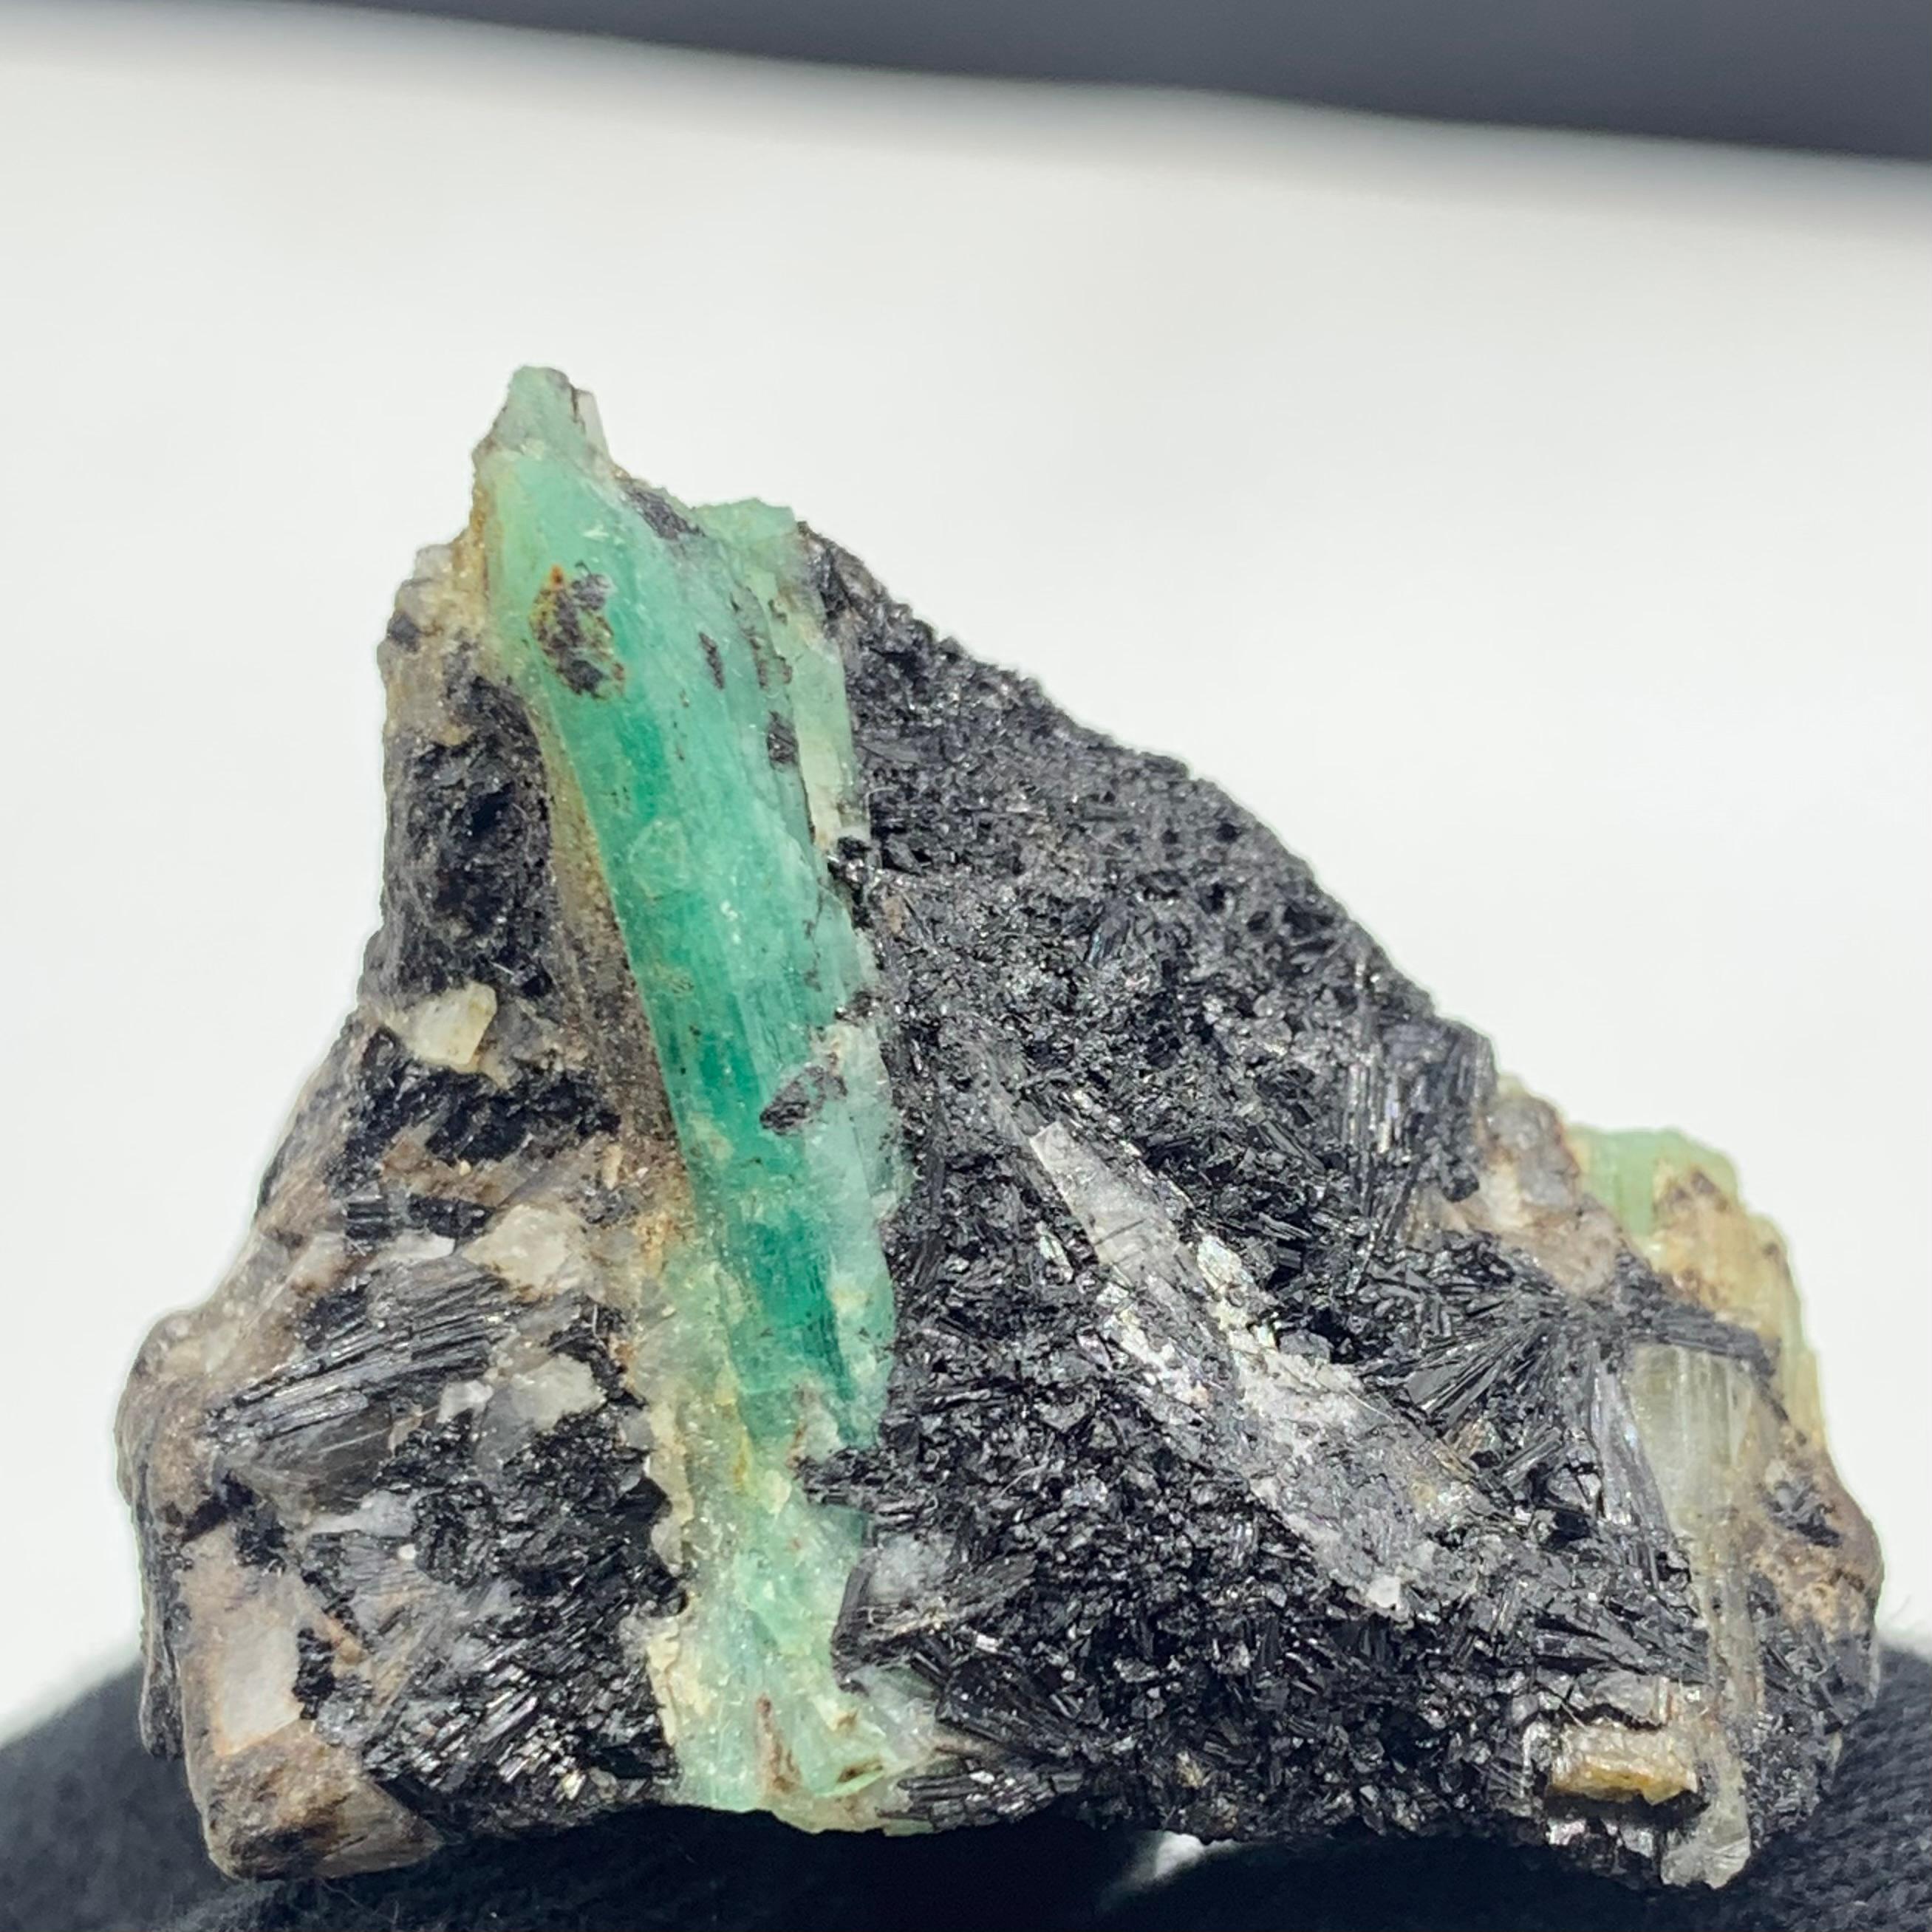 31.50 Gram Gorgeous Emerald Specimen From Chitral, Pakistan 

Weight: 31.50 Gram 
Dimension: 3.1 x 3.9 x 2.5 Cm
Origin: Chitral, Khyber Pukhtunkhuwa Province, Pakistan 

Emerald has the chemical composition Be3Al2(SiO3)6 and is classified as a